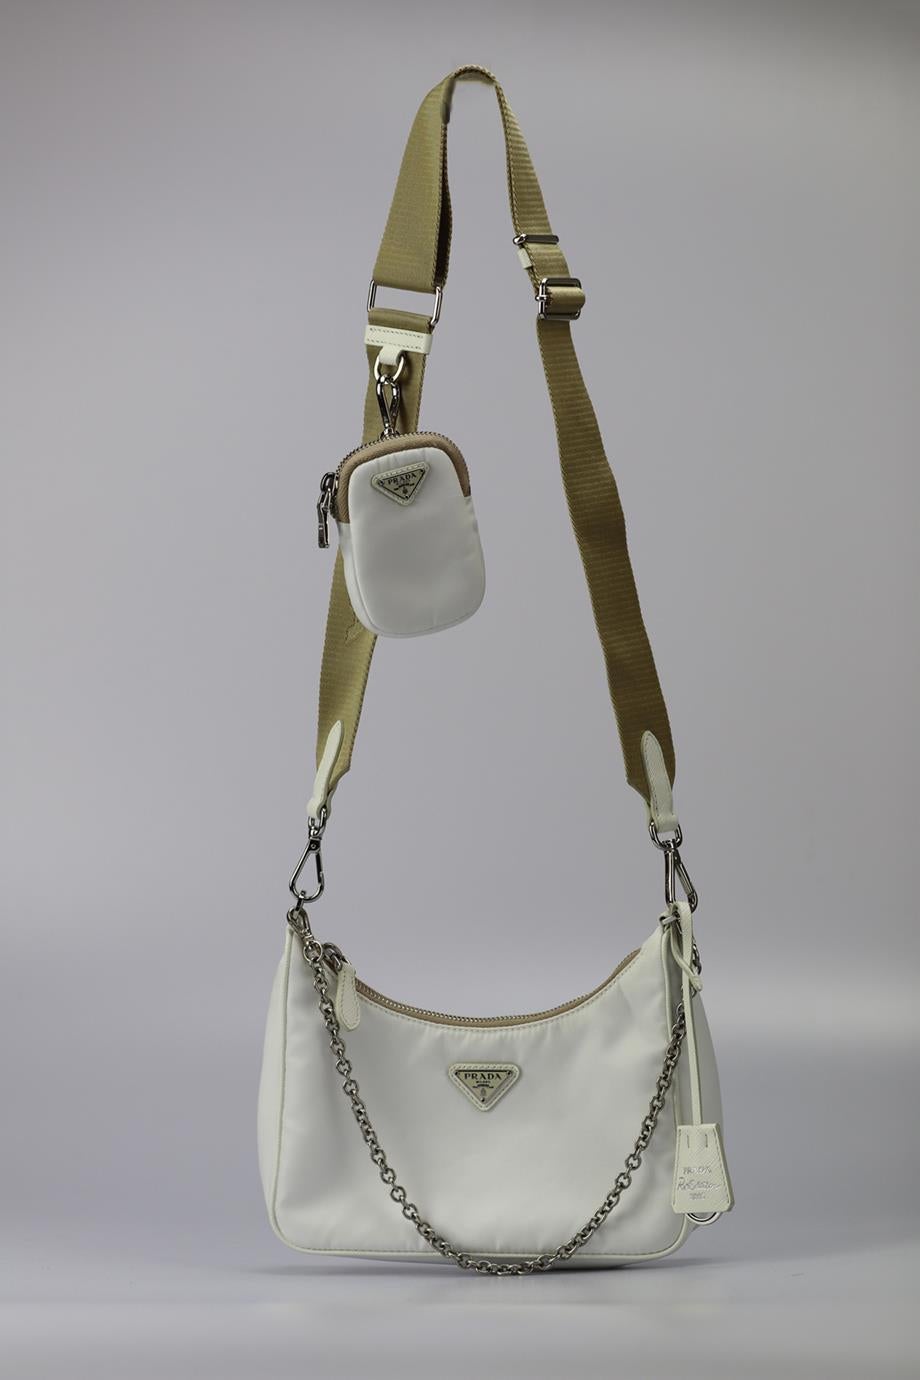 Prada Re-edition 2005 Textured Leather And Nylon Shoulder Bag. White. Zip fastening - Top. Does not come with - dustbag or box. Height: 6.3 In. Width: 8.5 In. Depth: 2.2 In. Handle drop: 10.5 in. Strap drop: 18.7 In. Condition: Used. Very good